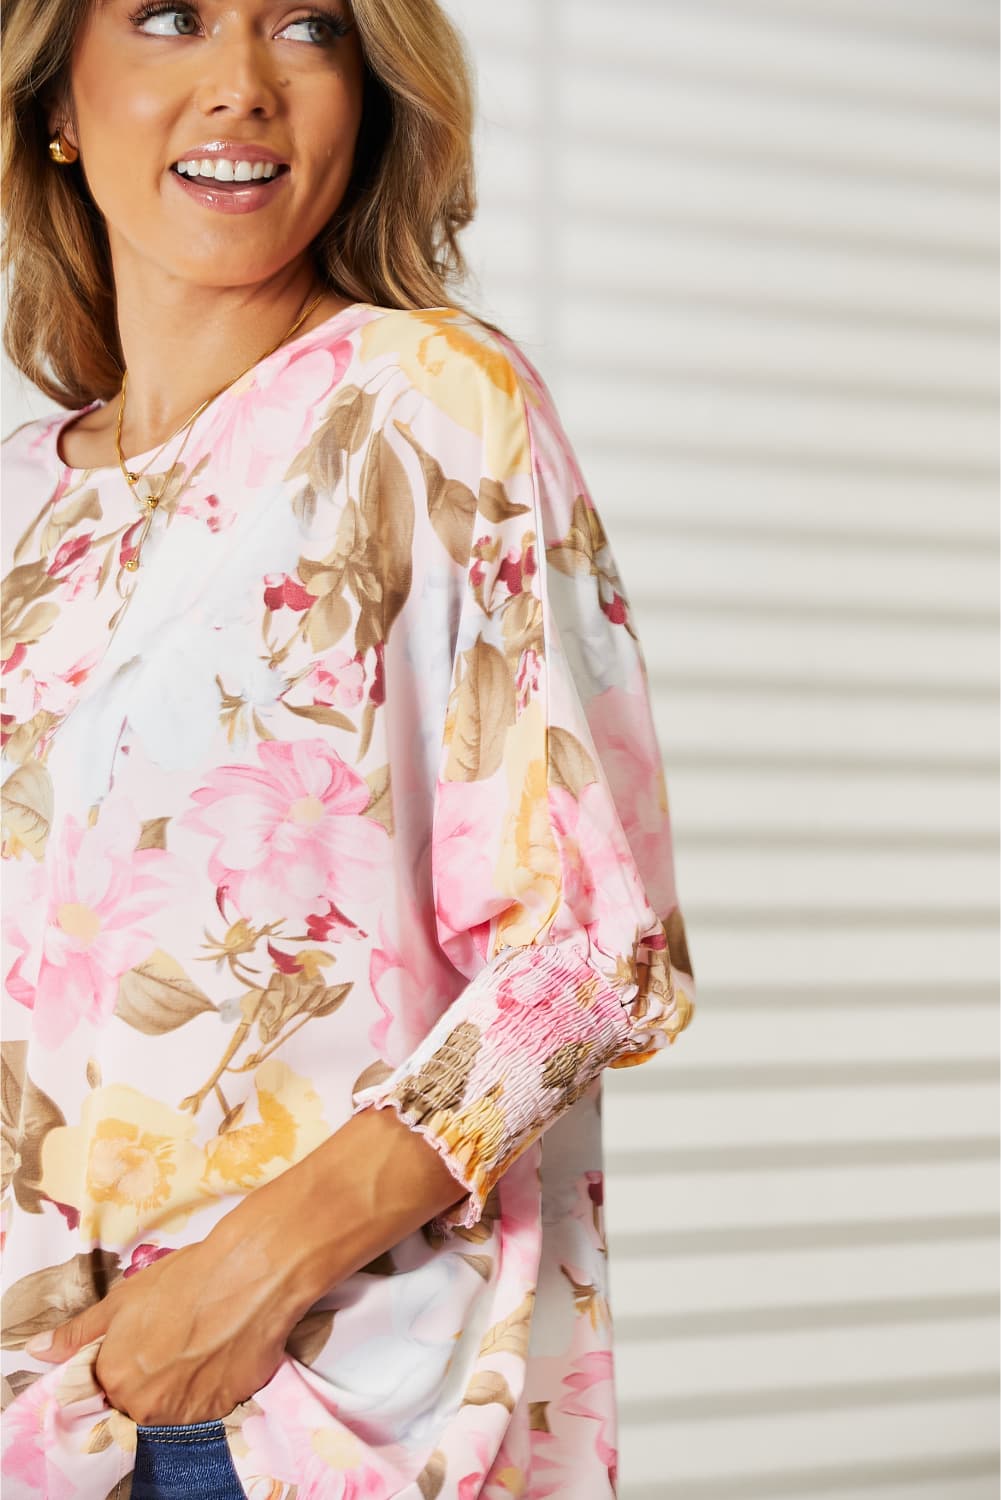 Floral Scoop Neck Three-Quarter Sleeve TopTopDouble Take